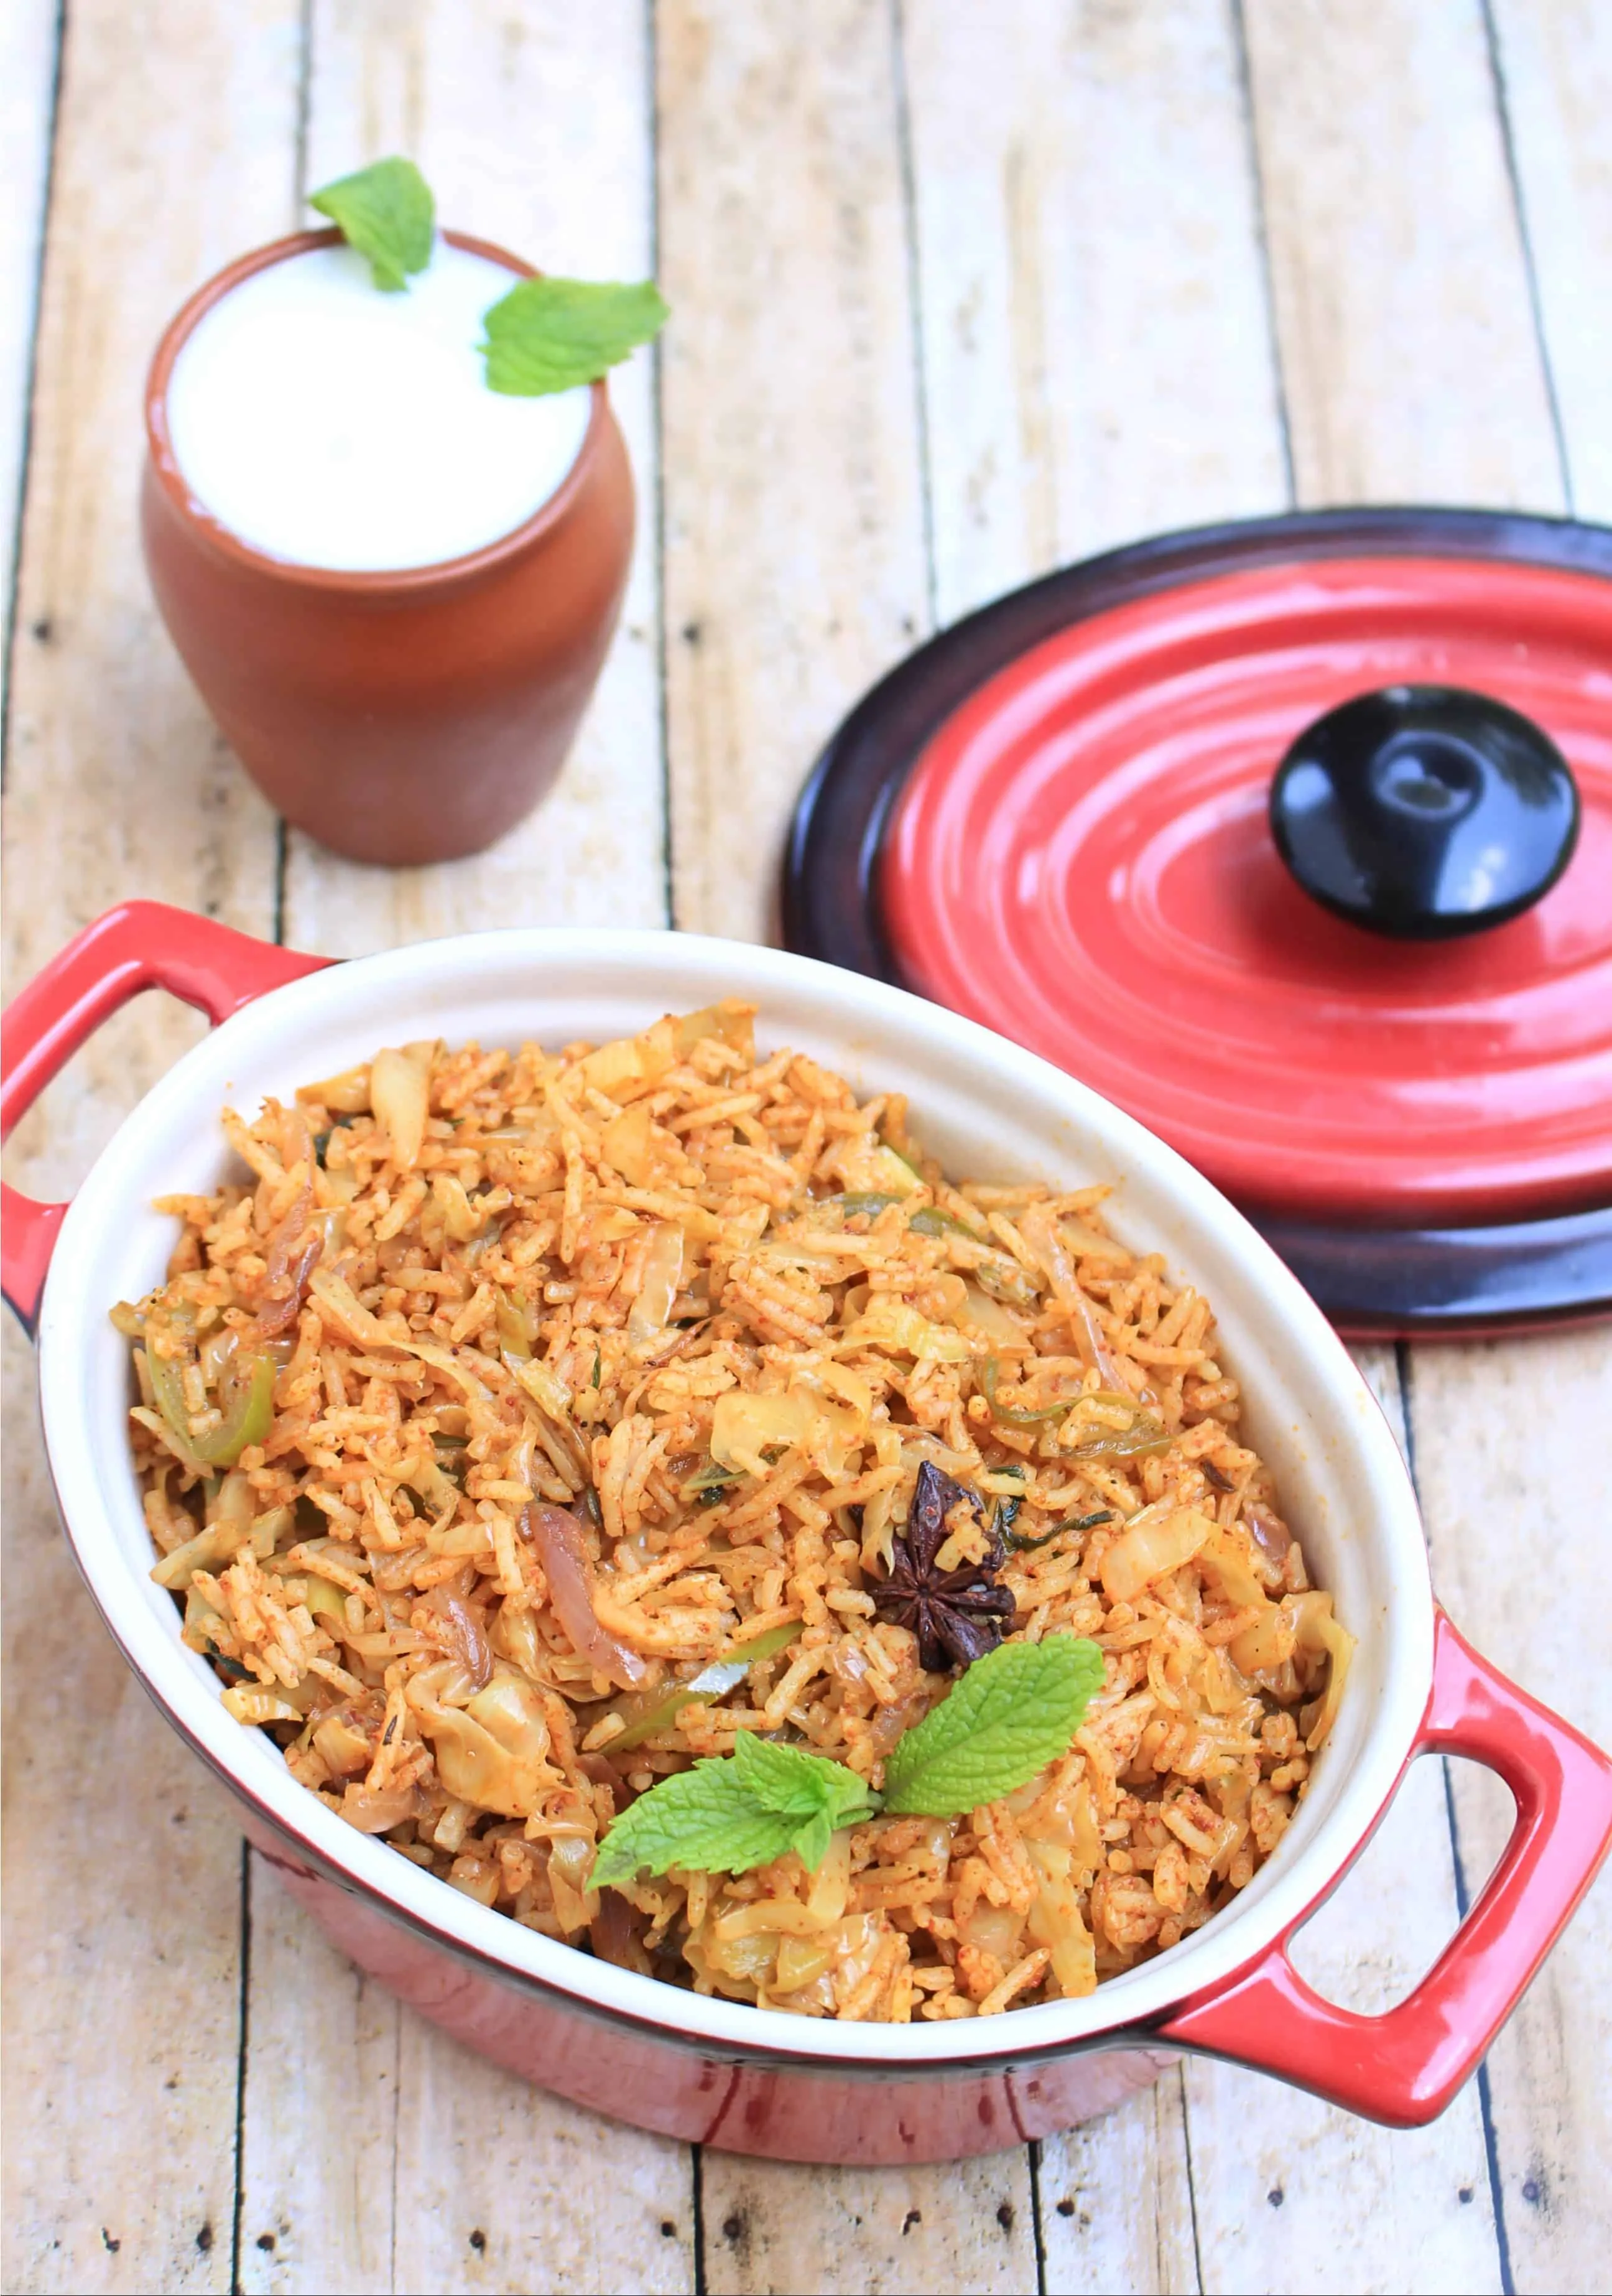 Spiced Cabbage Rice with a side of raita